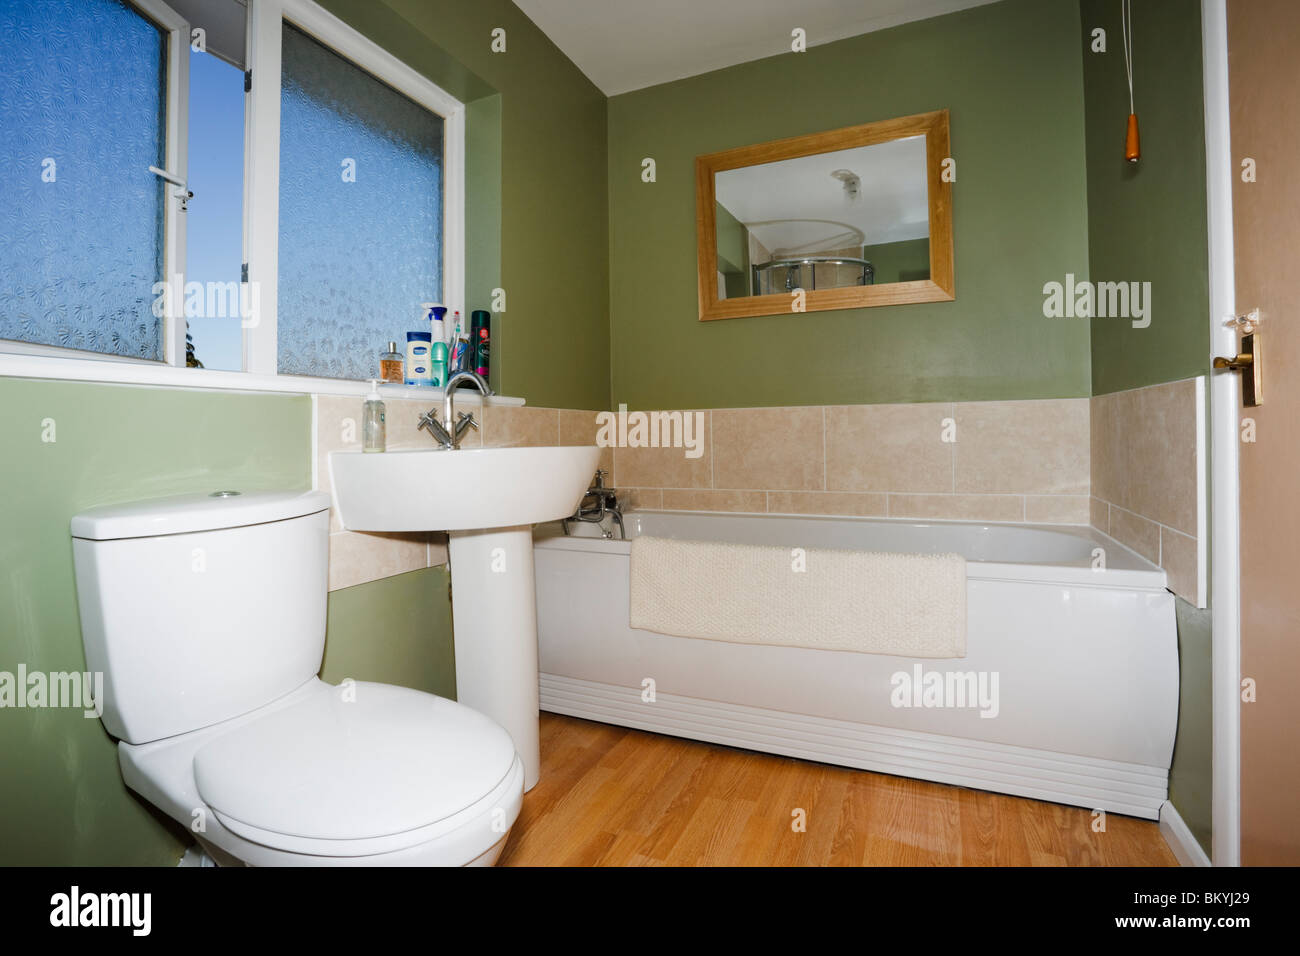 Small bathroom restroom with green walls and white suite with ceramic toilet, washbasin and bathtub. England, UK, Britain. Stock Photo